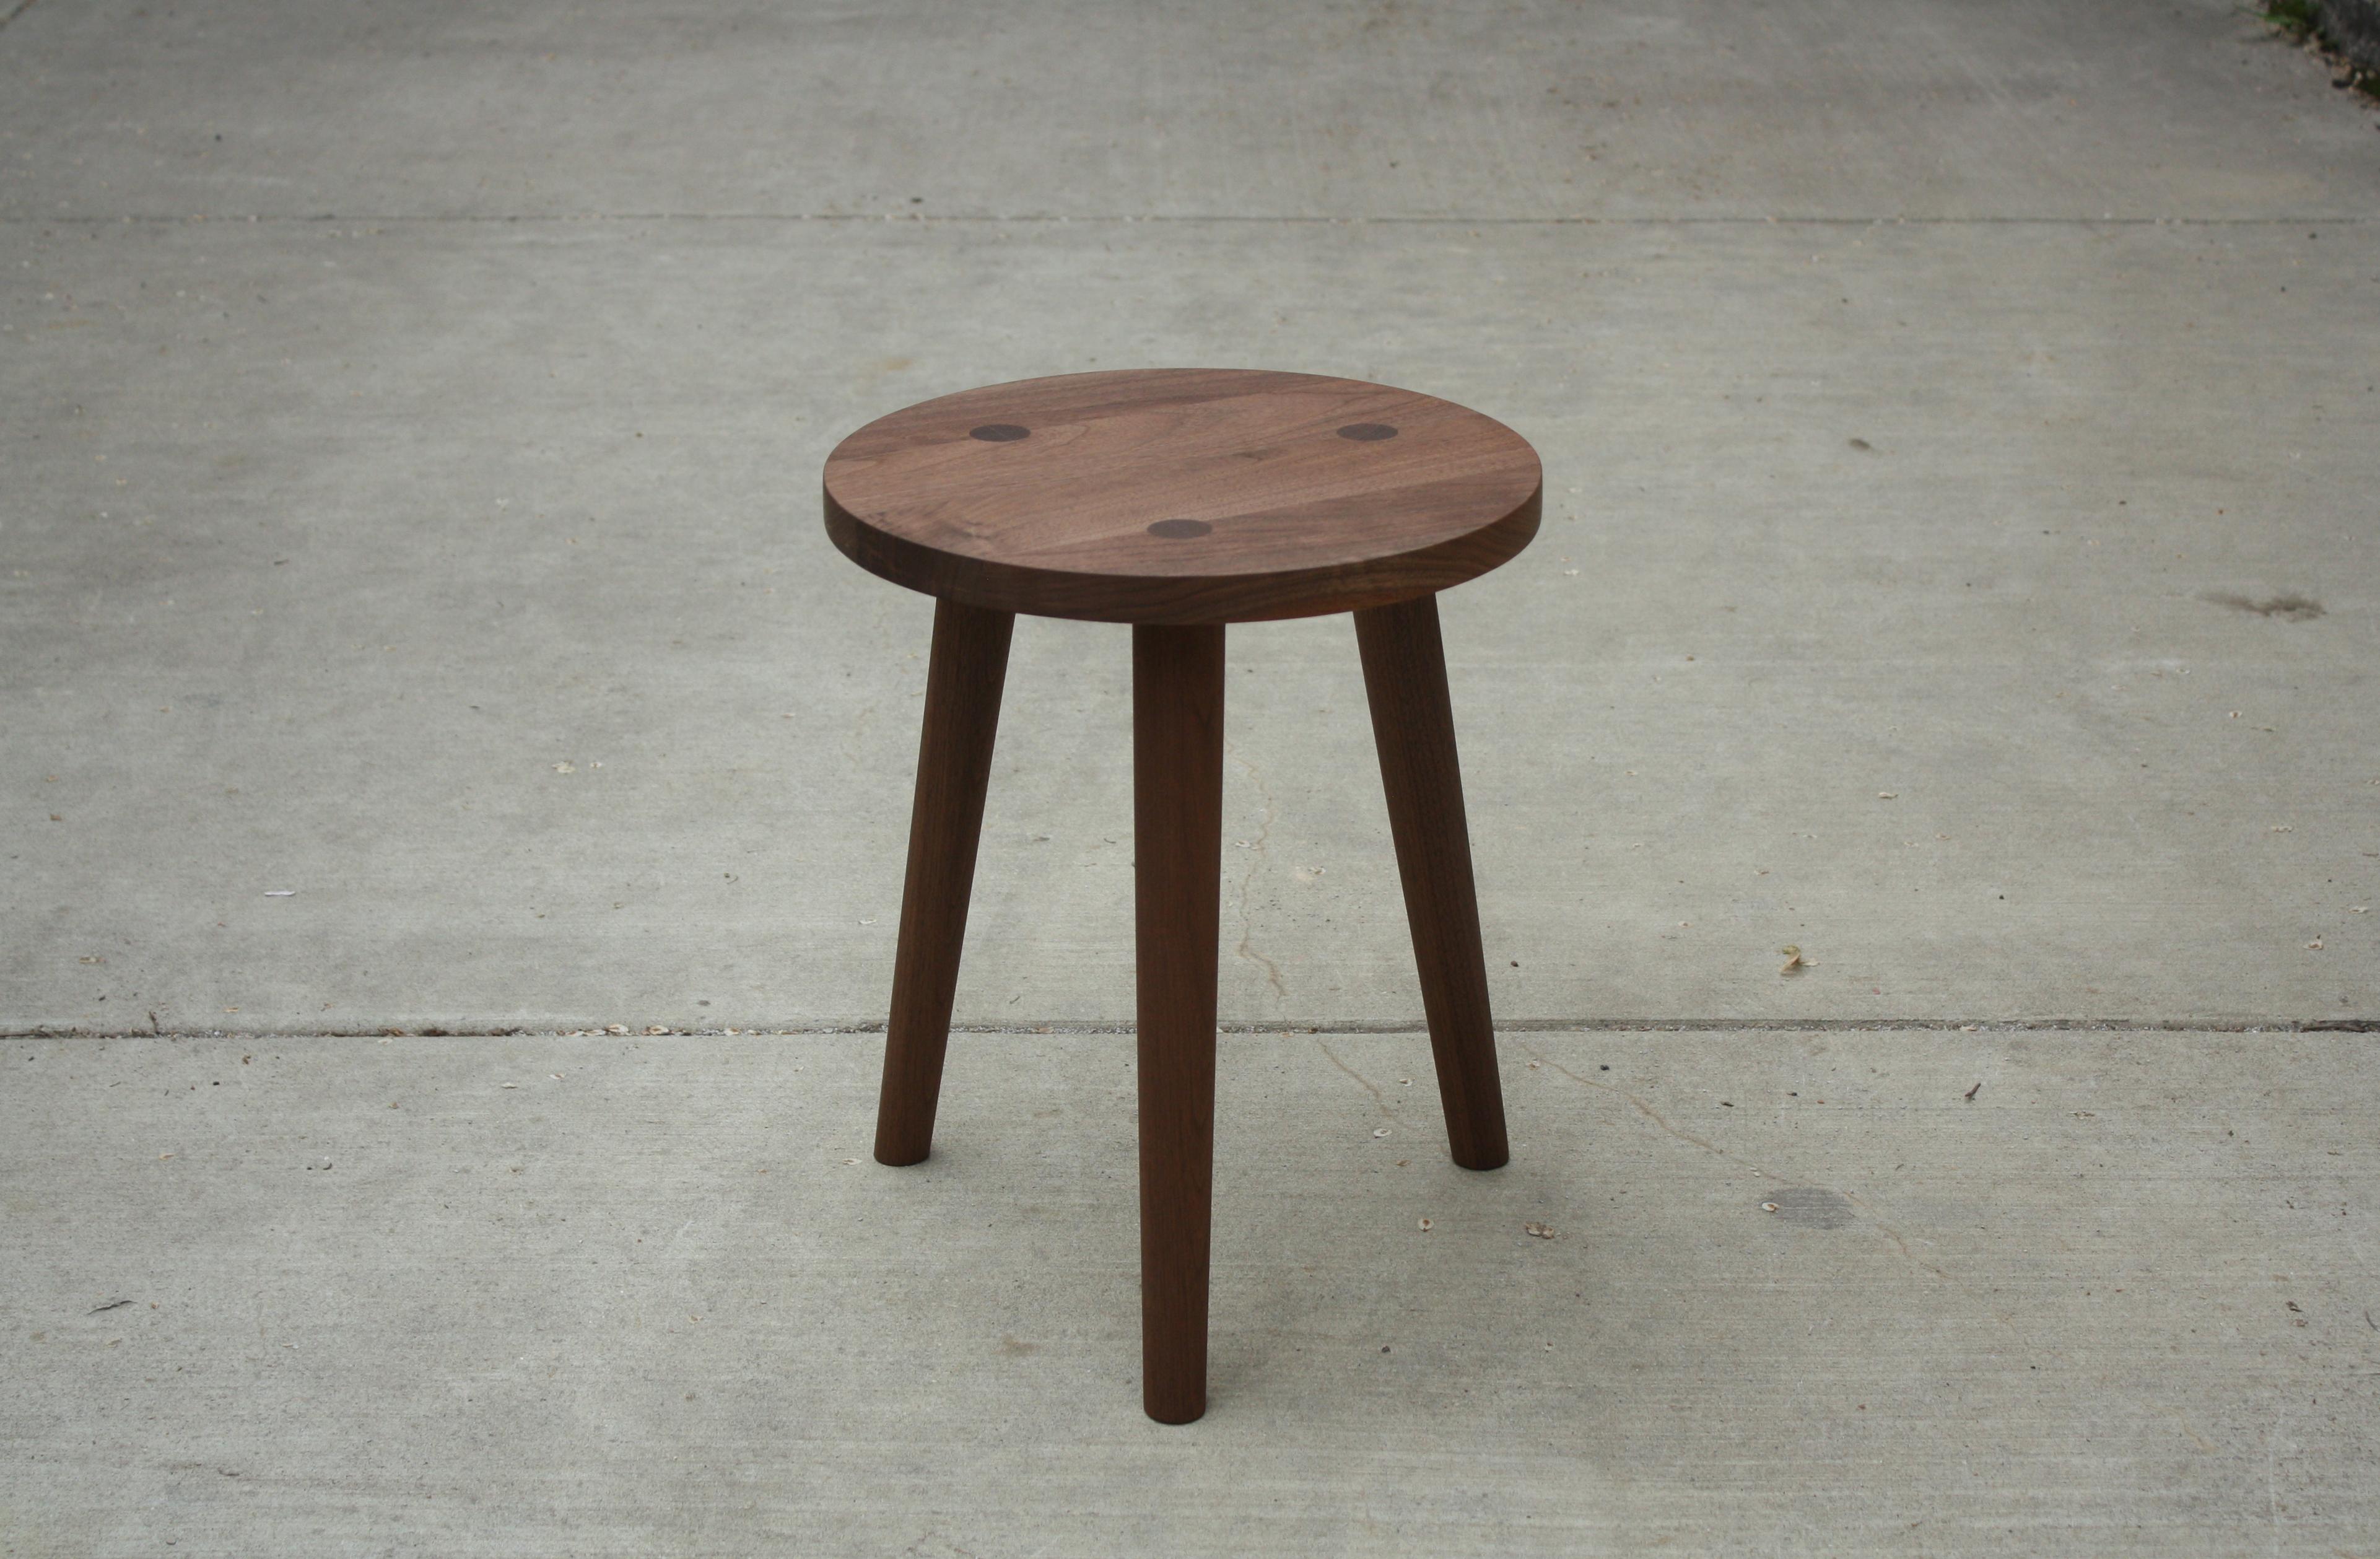 Ebonized Bare a Handmade Wood Table by Laylo Studio For Sale